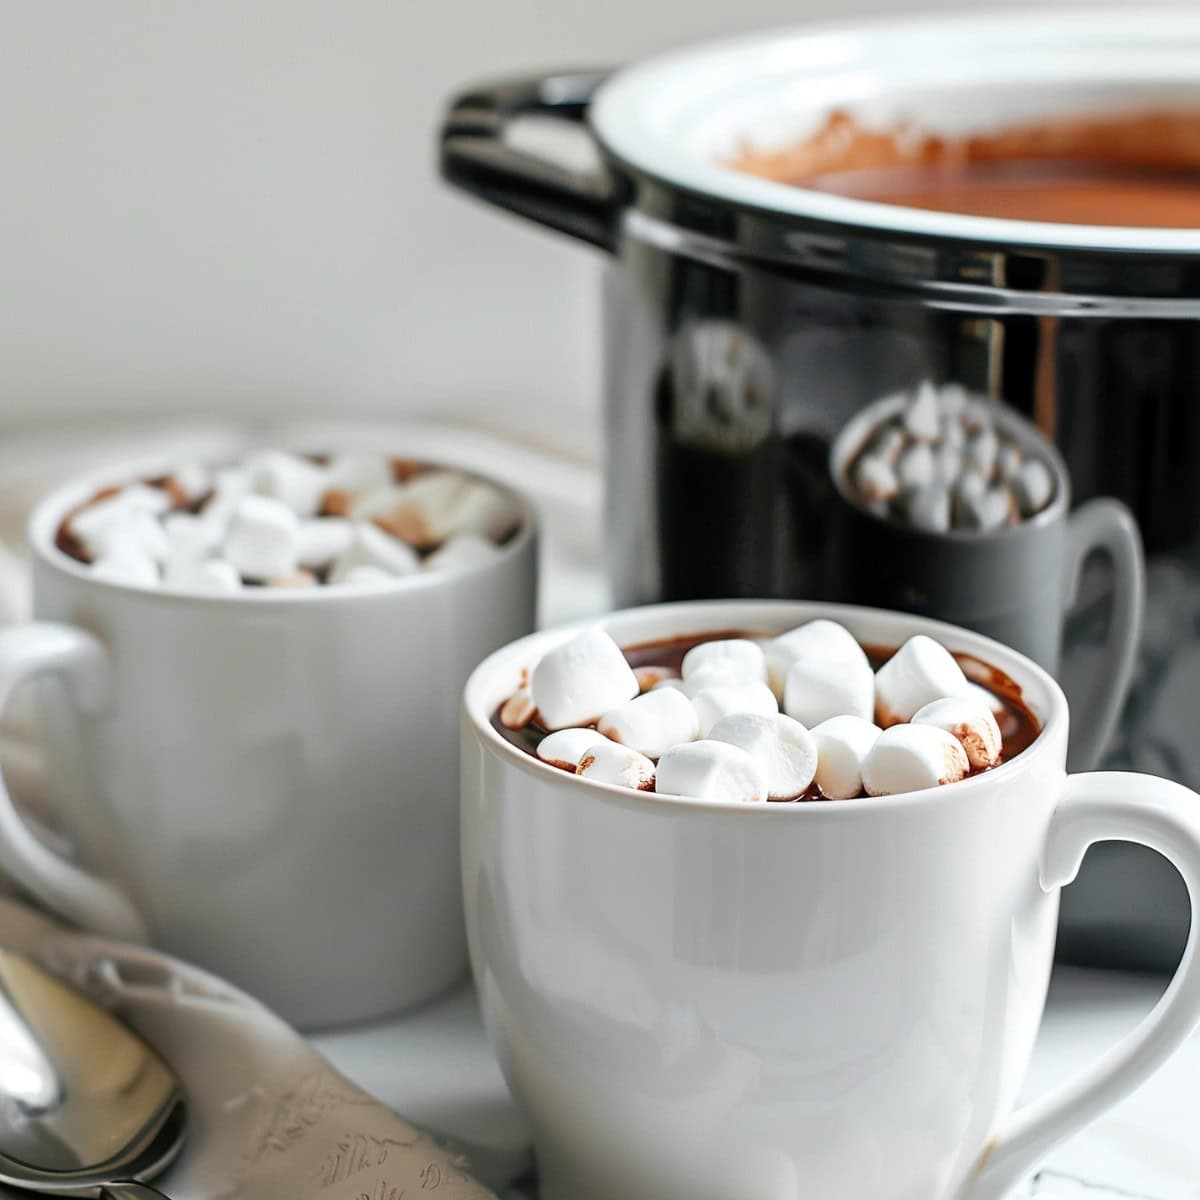 Two Mugs with Crockpot Hot Chocolate and Marshmallows with the Crockpot in the Background